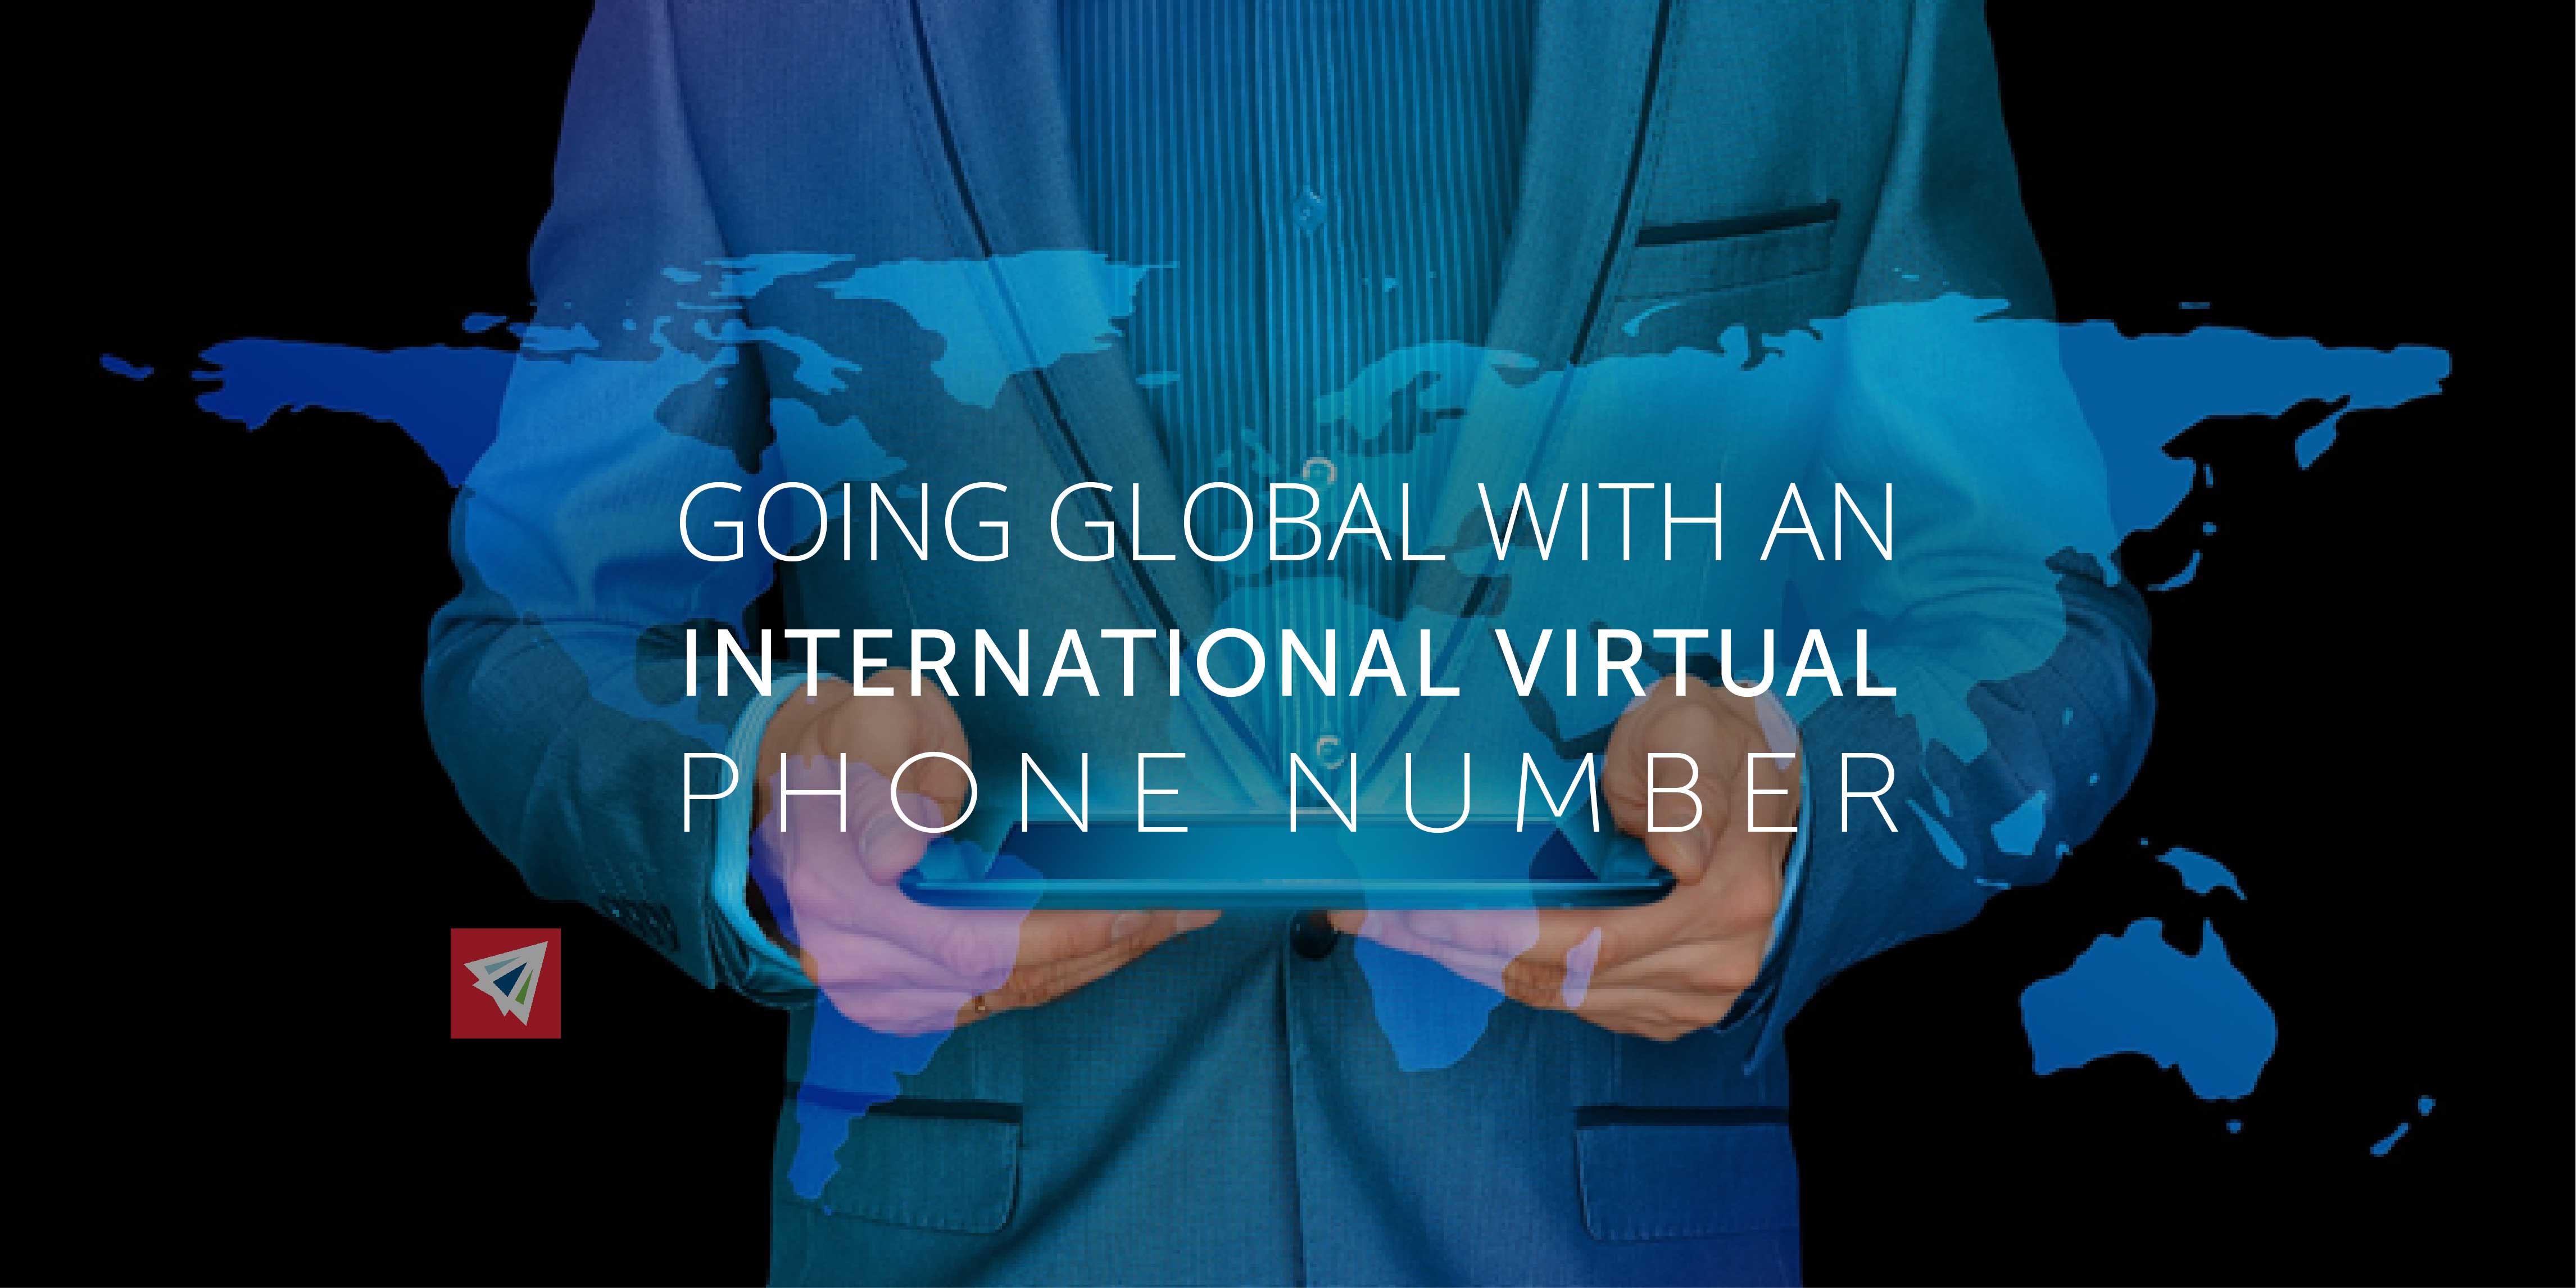 Going Global With an International Virtual Phone Number